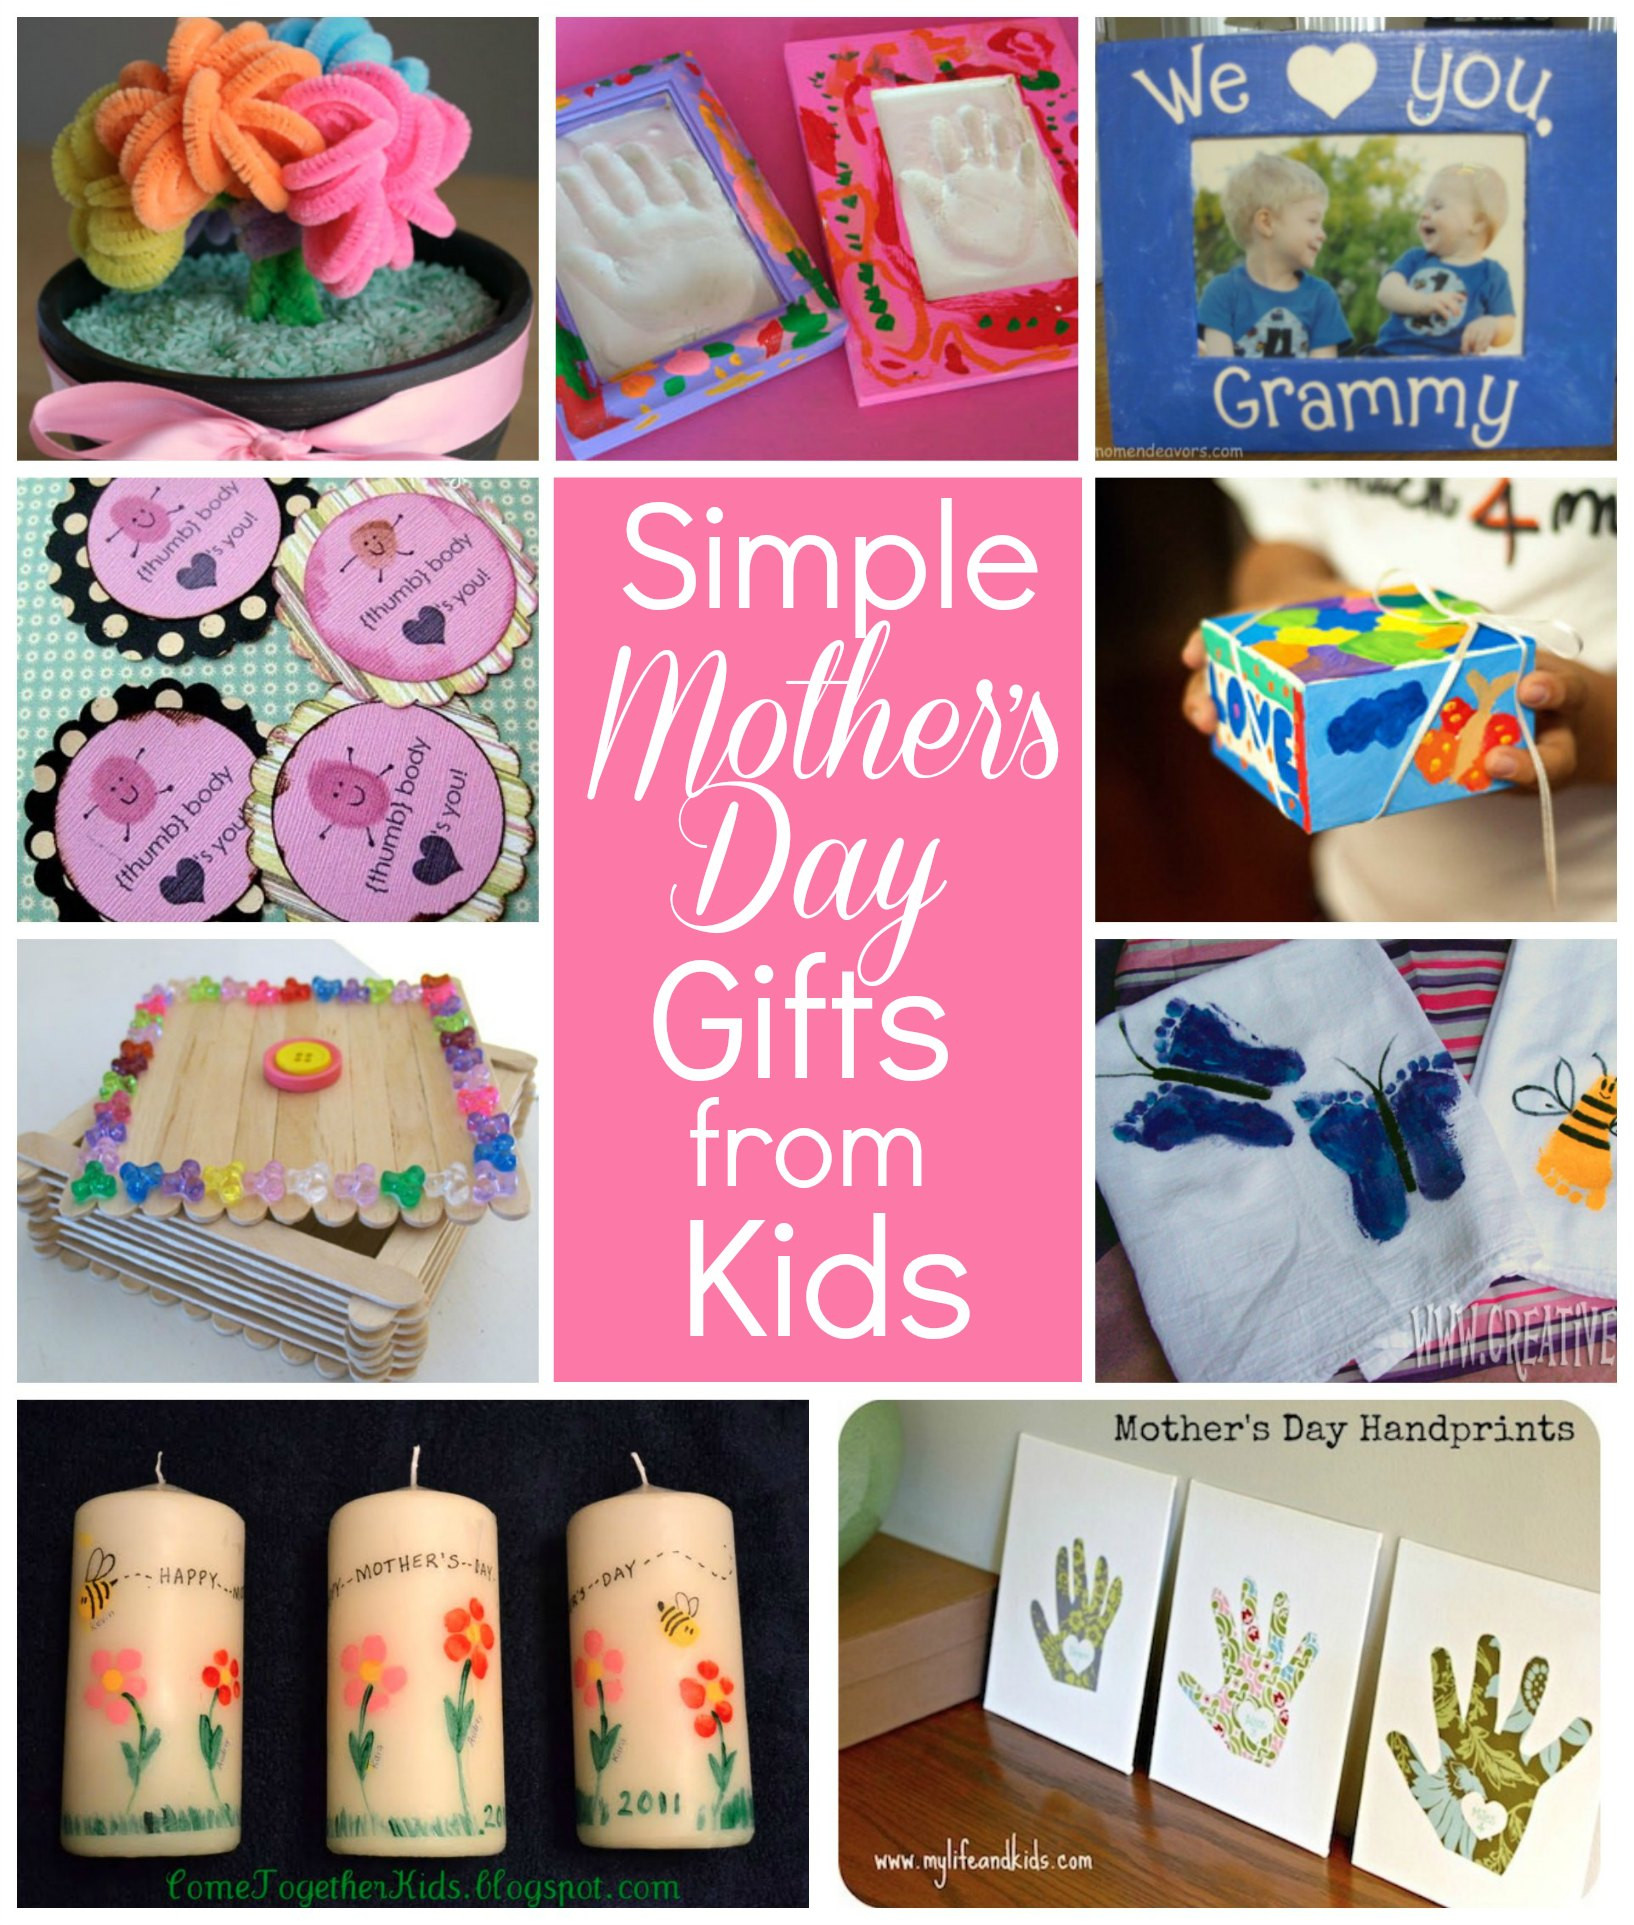 Mothers Day Ideas To Make
 Simple Mother’s Day t ideas for grandma Flower pot